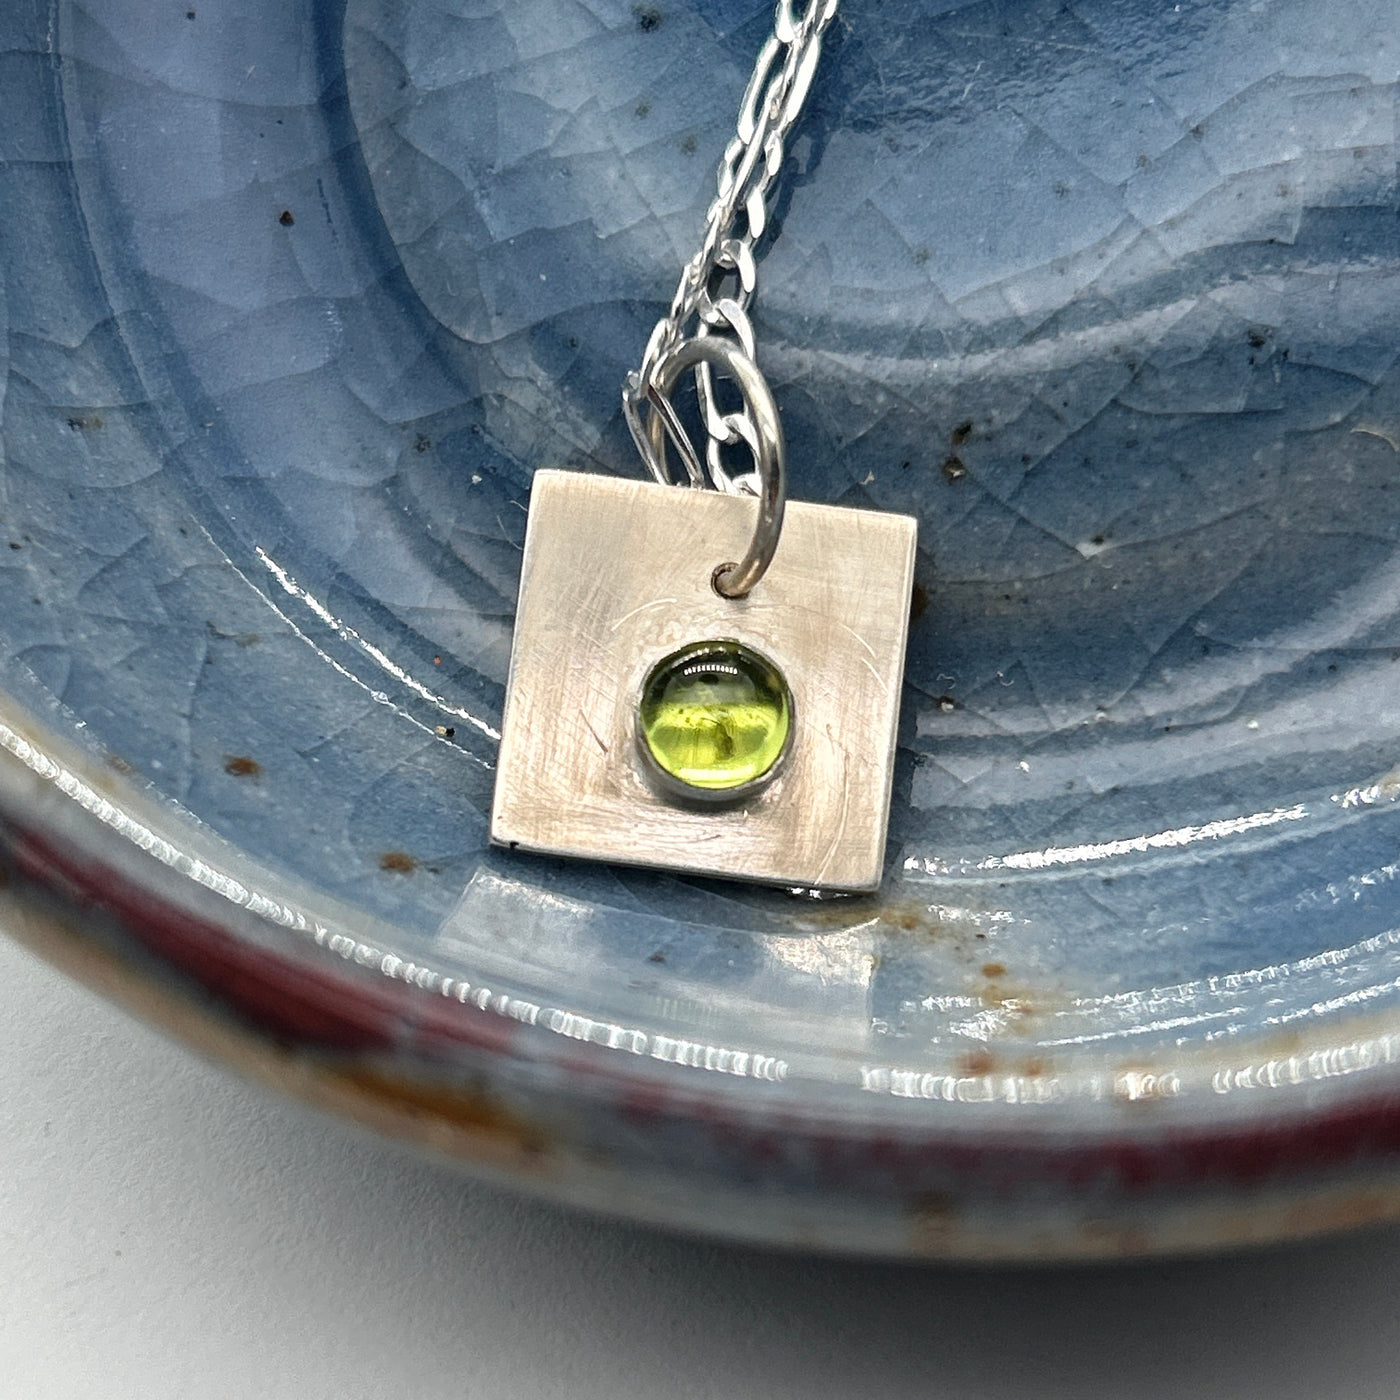 Peridot cabochon 6 mm on silver square pendant mounted on silver chain